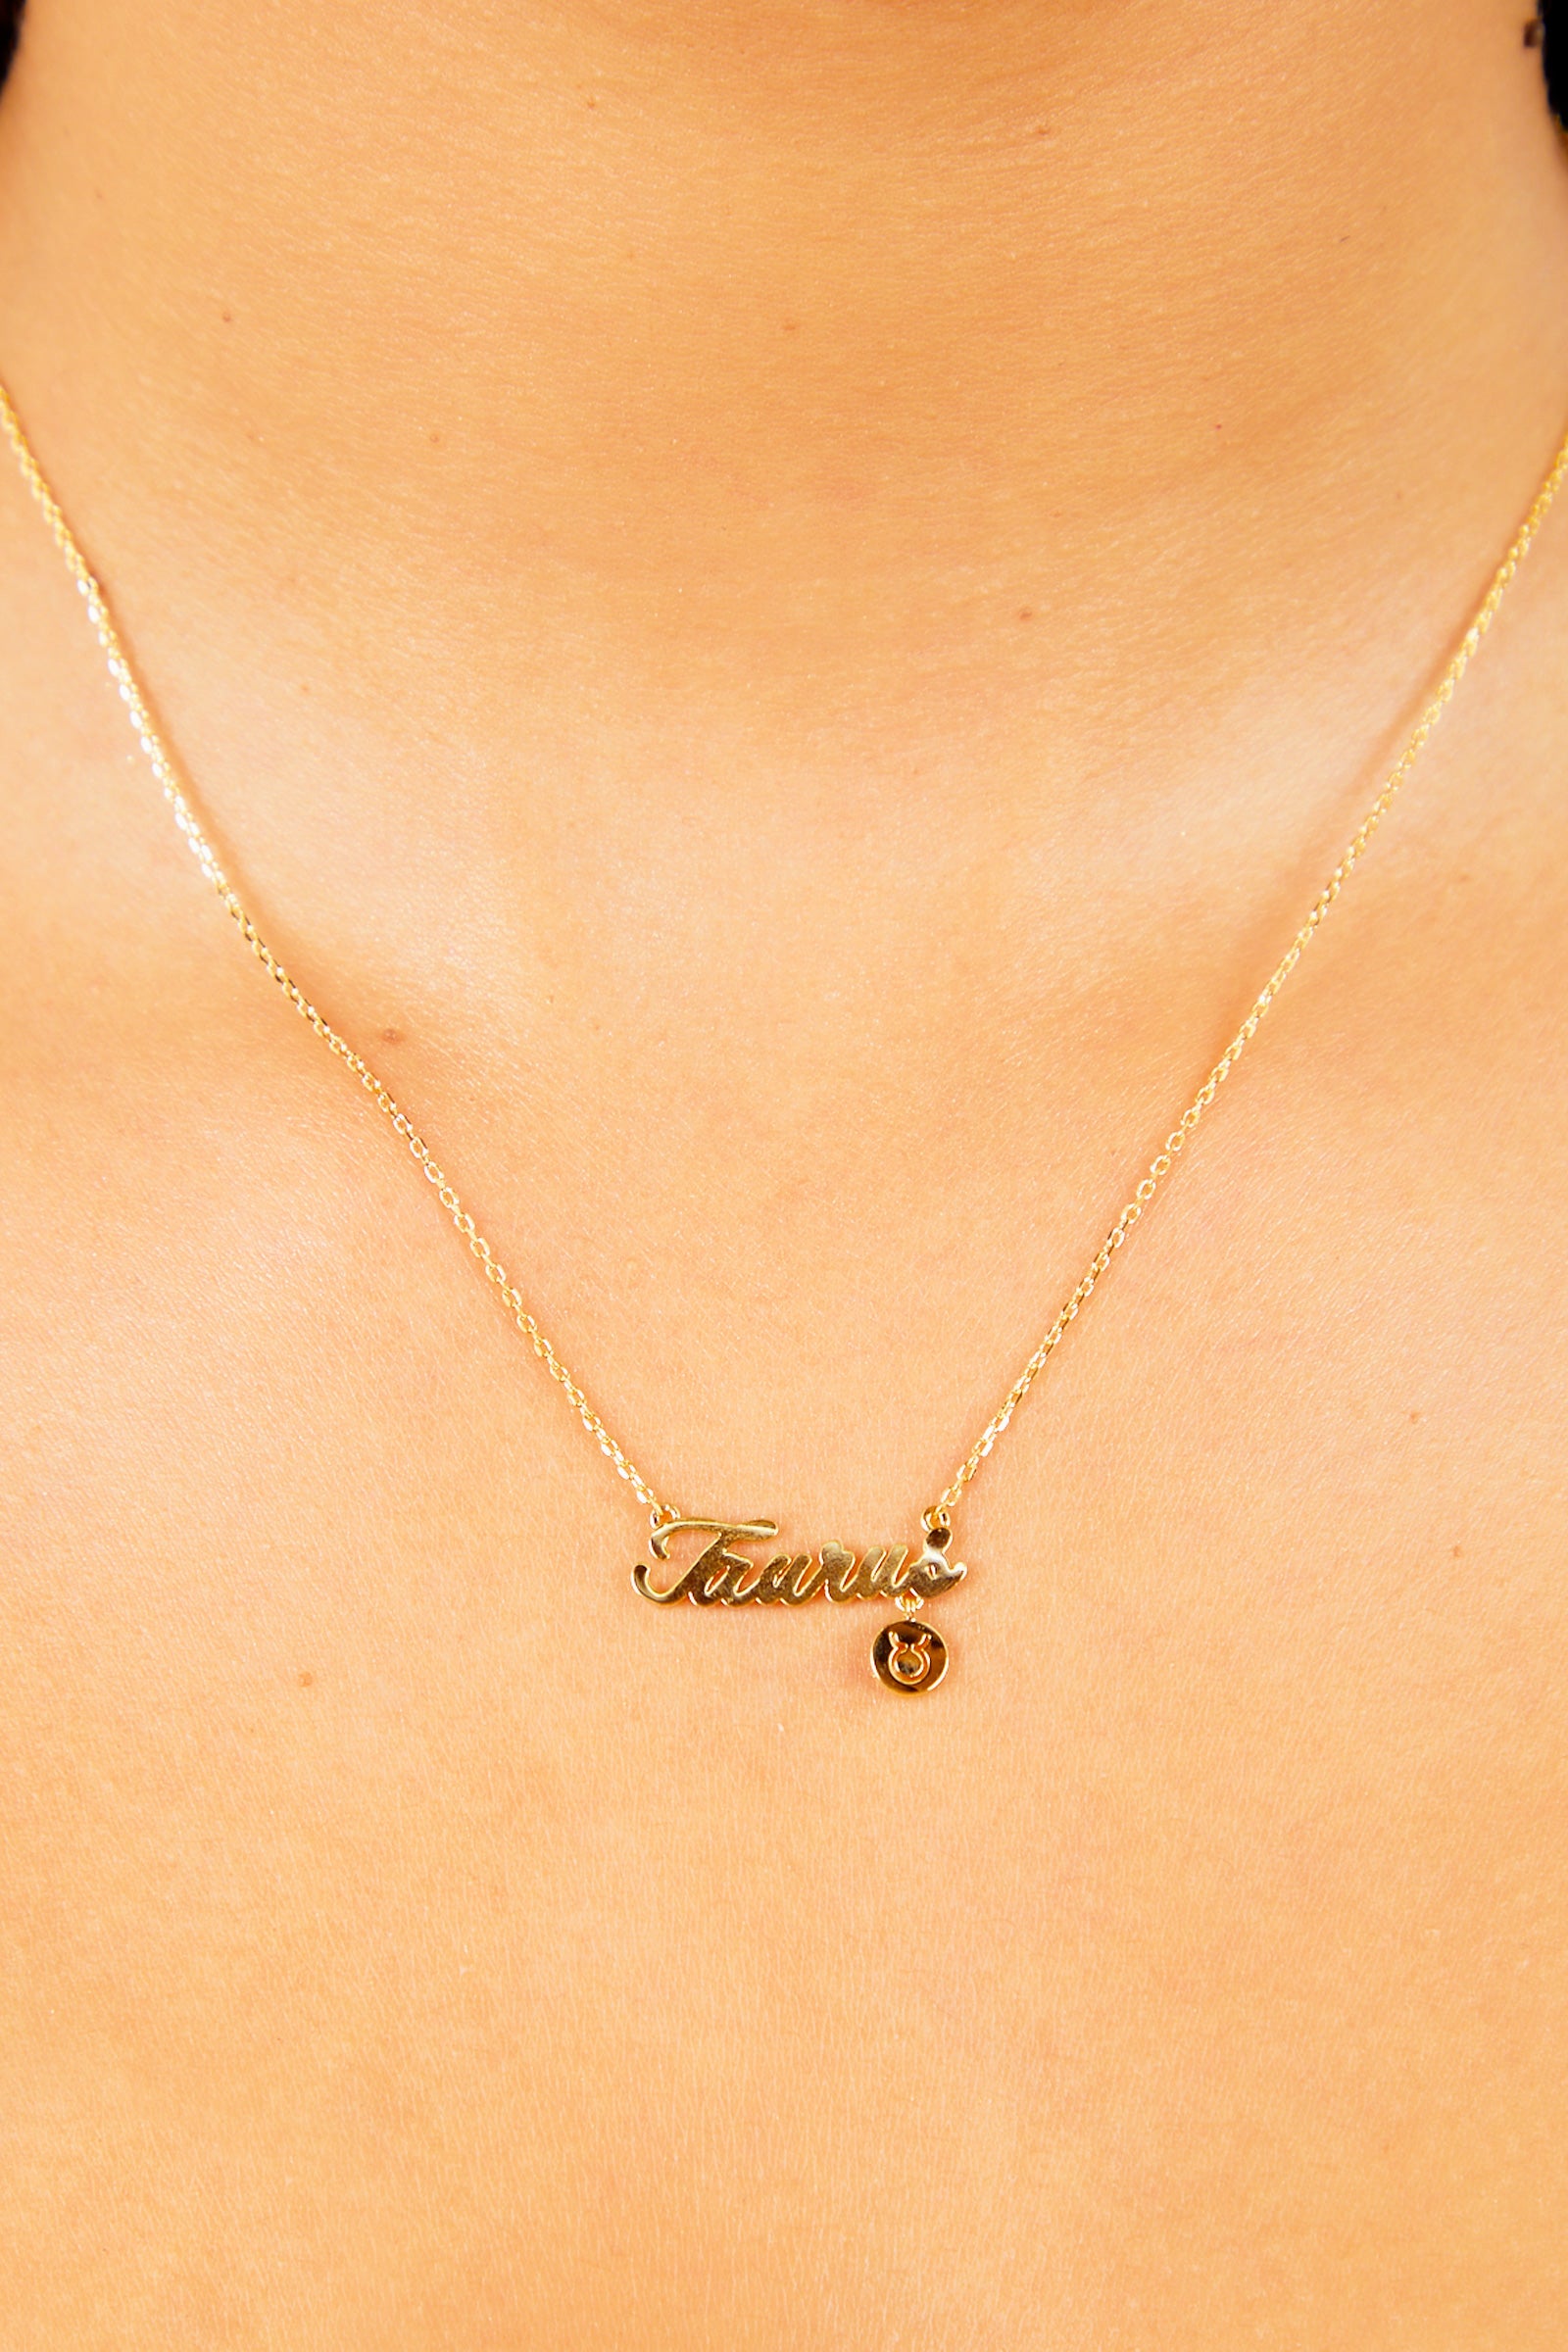 Taurus Nameplate Necklace - Gold